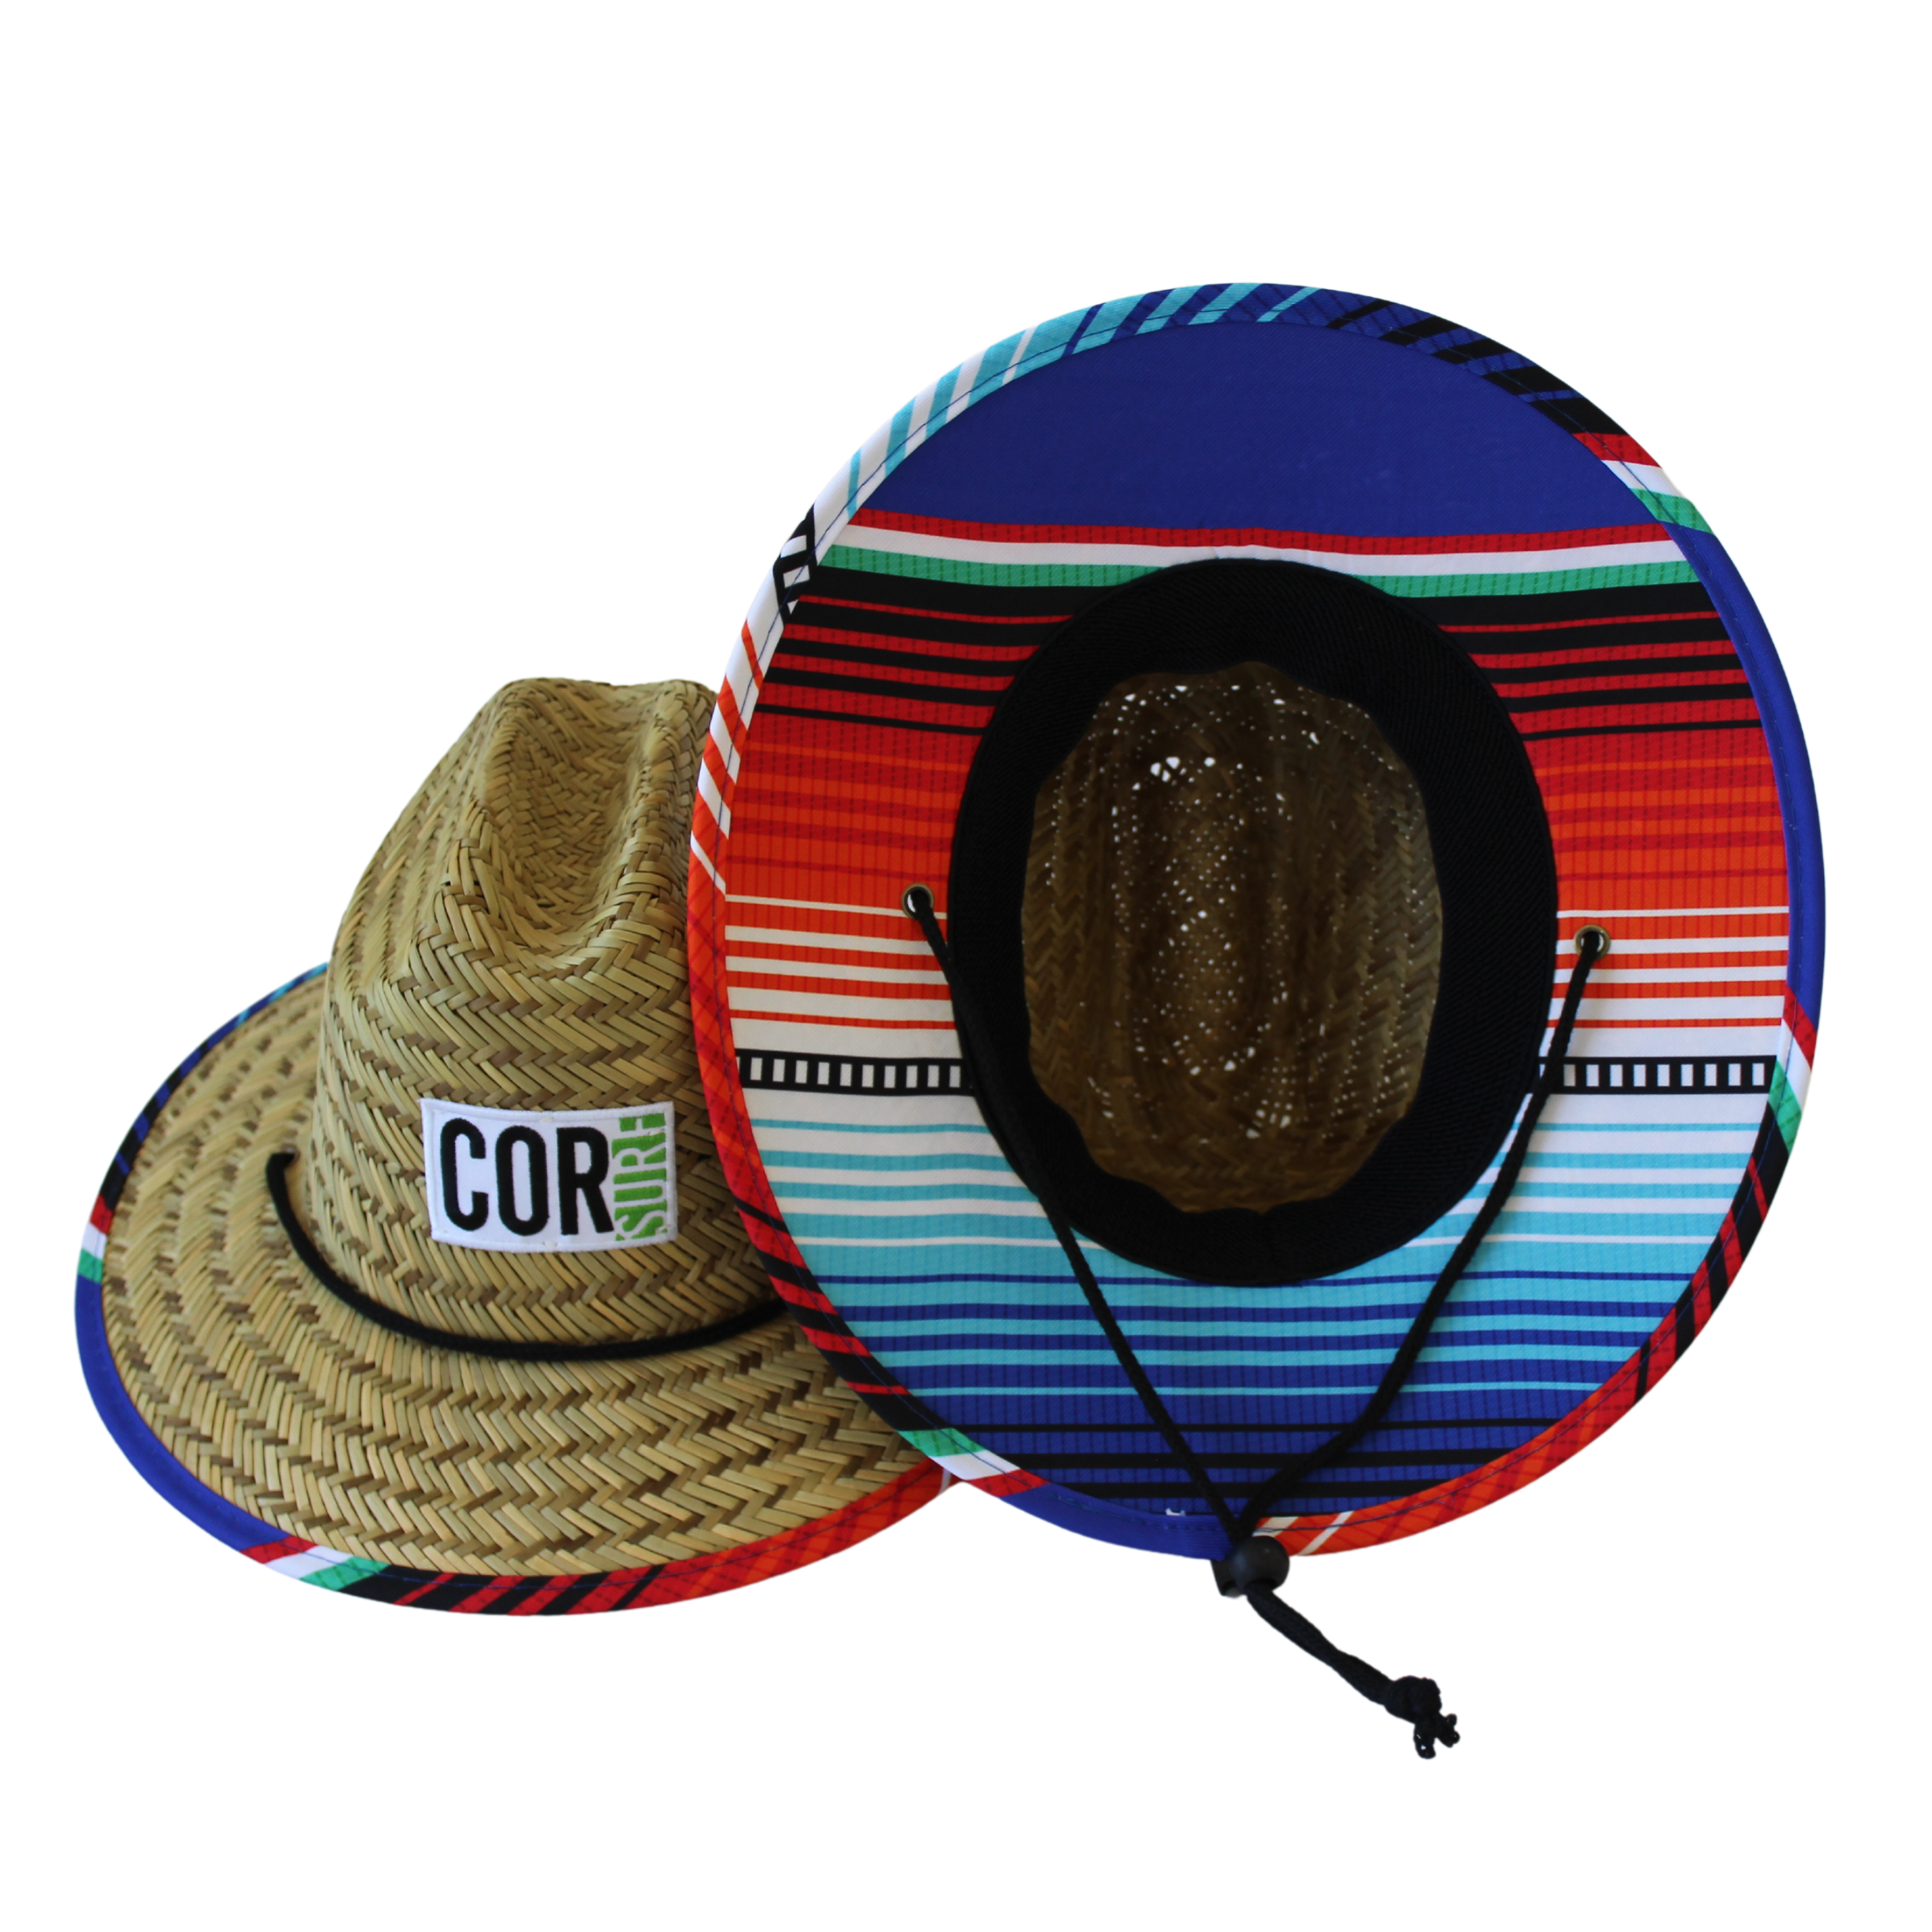 Kids Straw Hat Summer Beach Hat for Boys and Girls